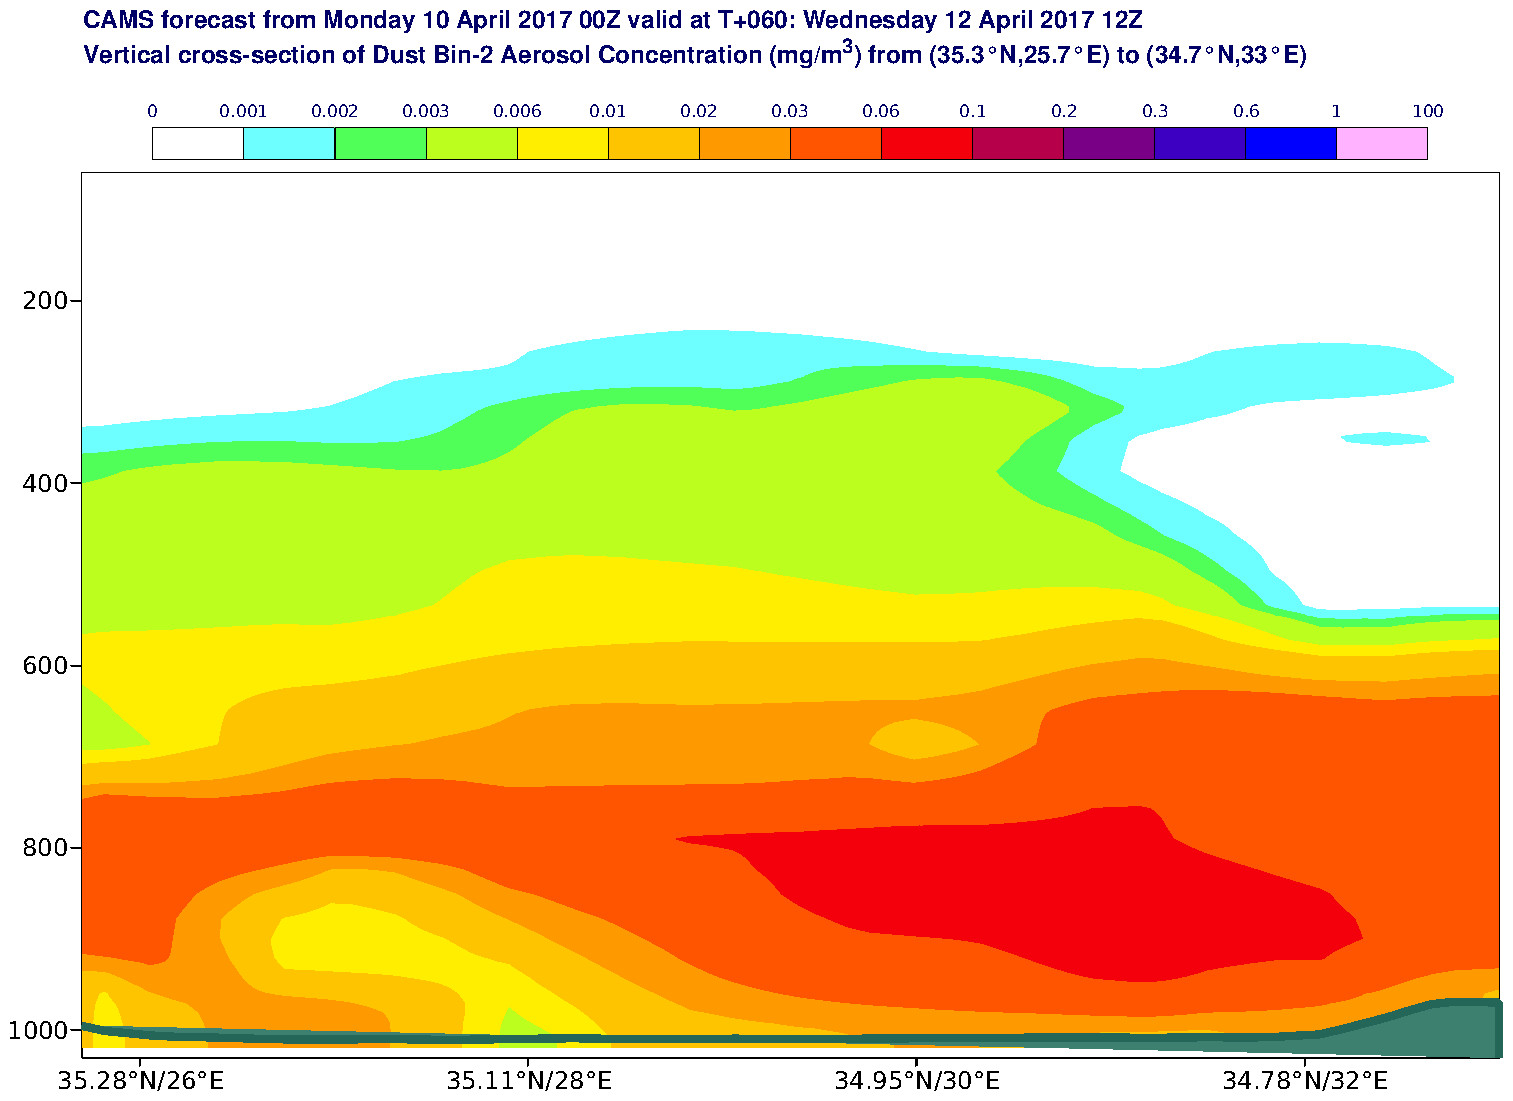 Vertical cross-section of Dust Bin-2 Aerosol Concentration (mg/m3) valid at T60 - 2017-04-12 12:00